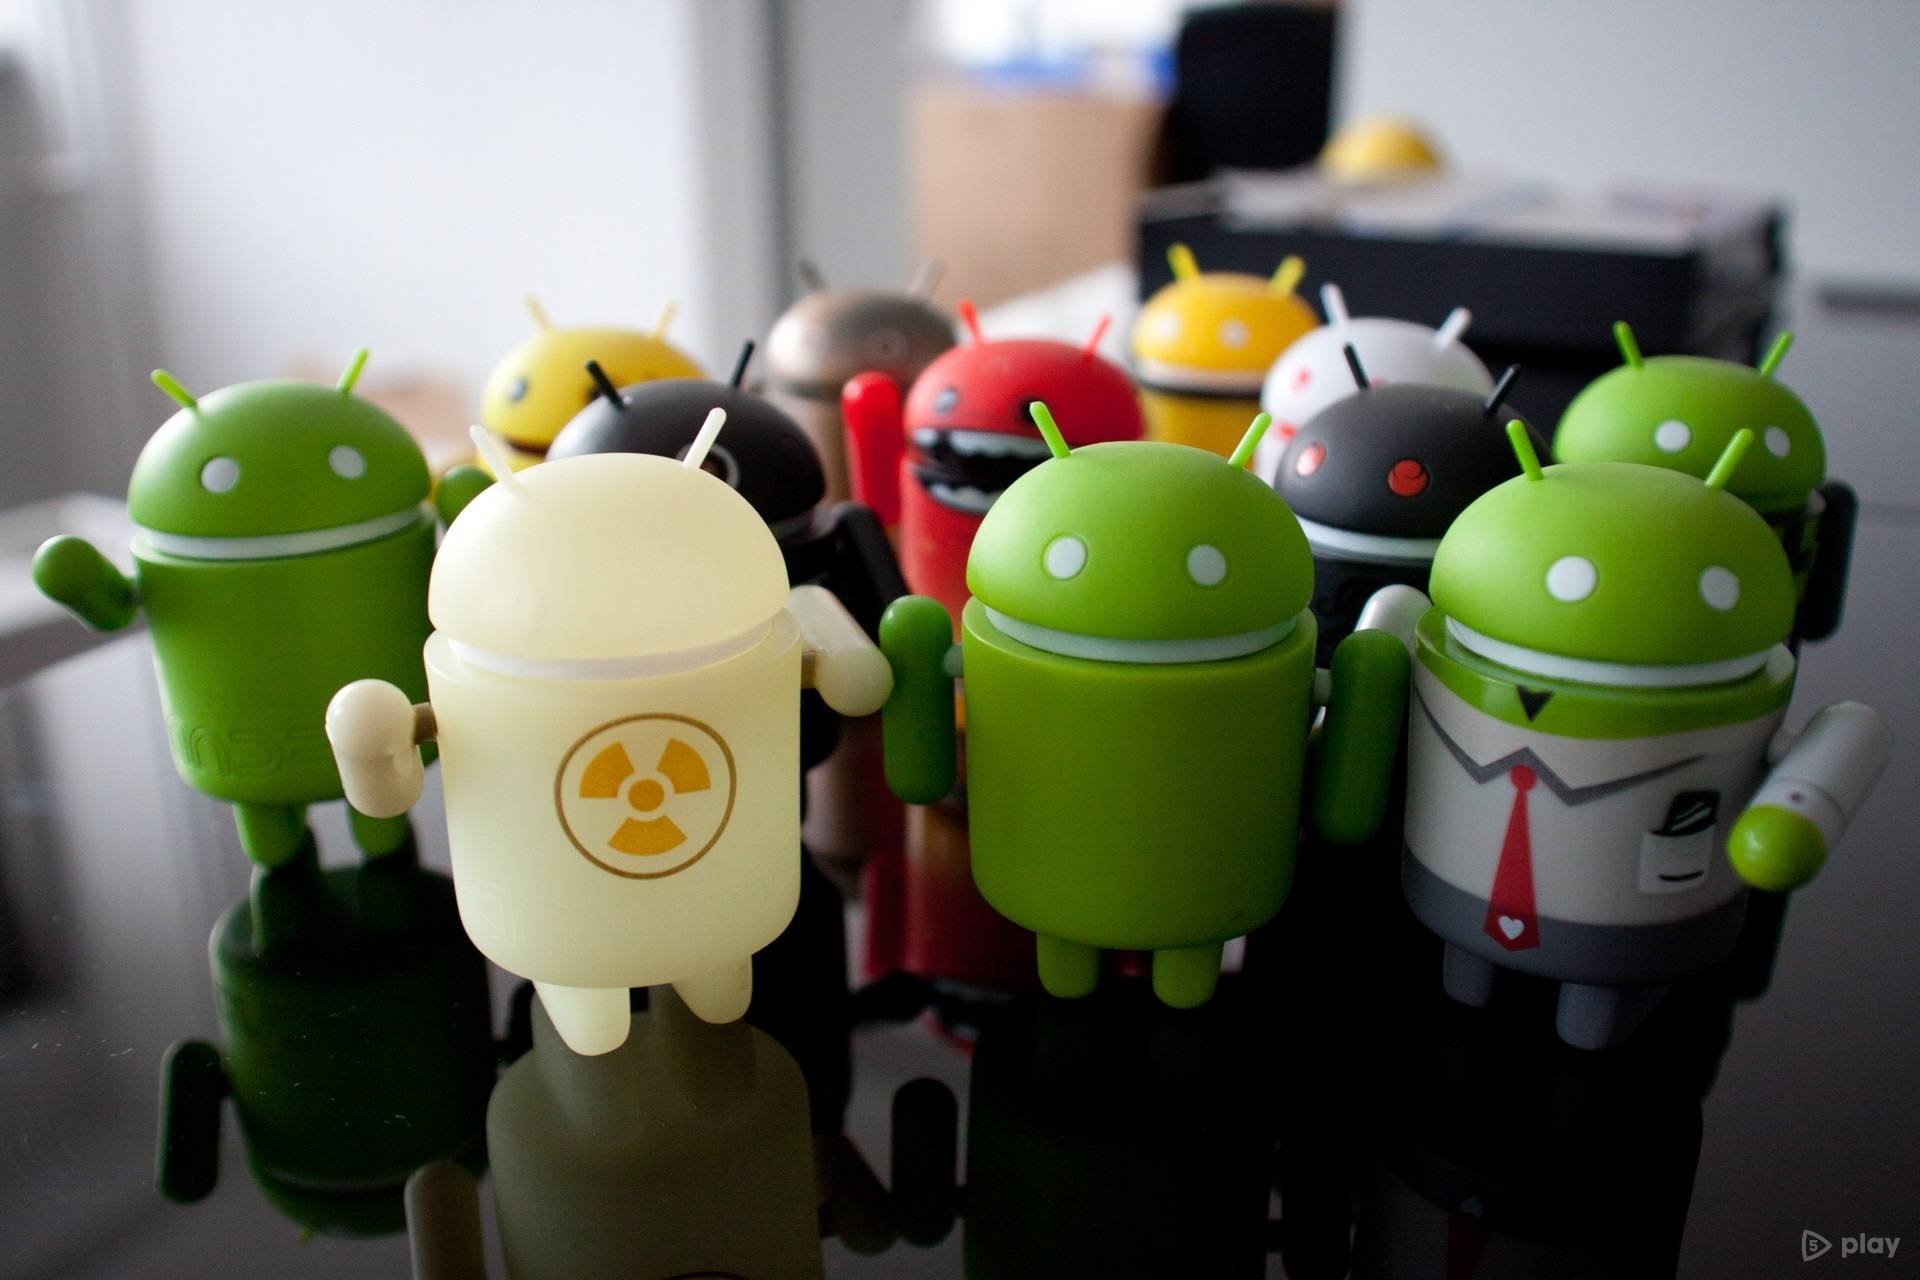 Android 13 could get streaming function